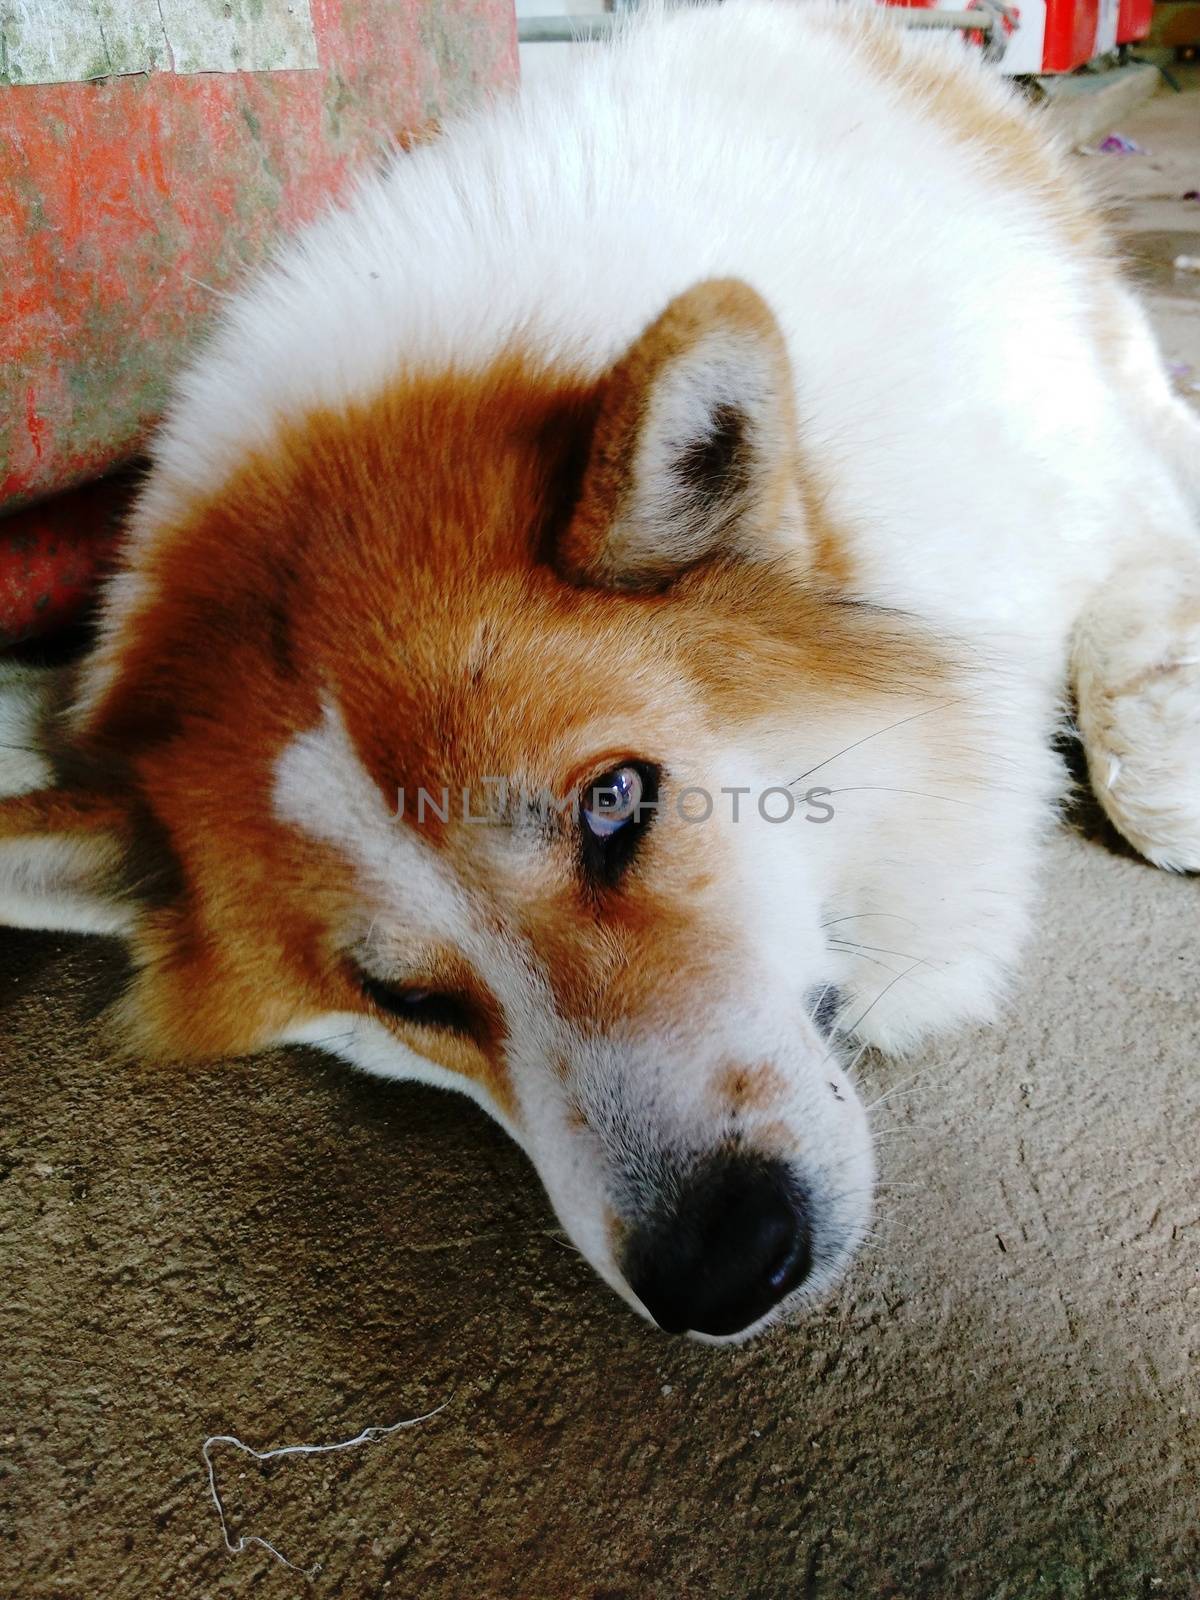 White and Brown Dog in Sleepy Emotion